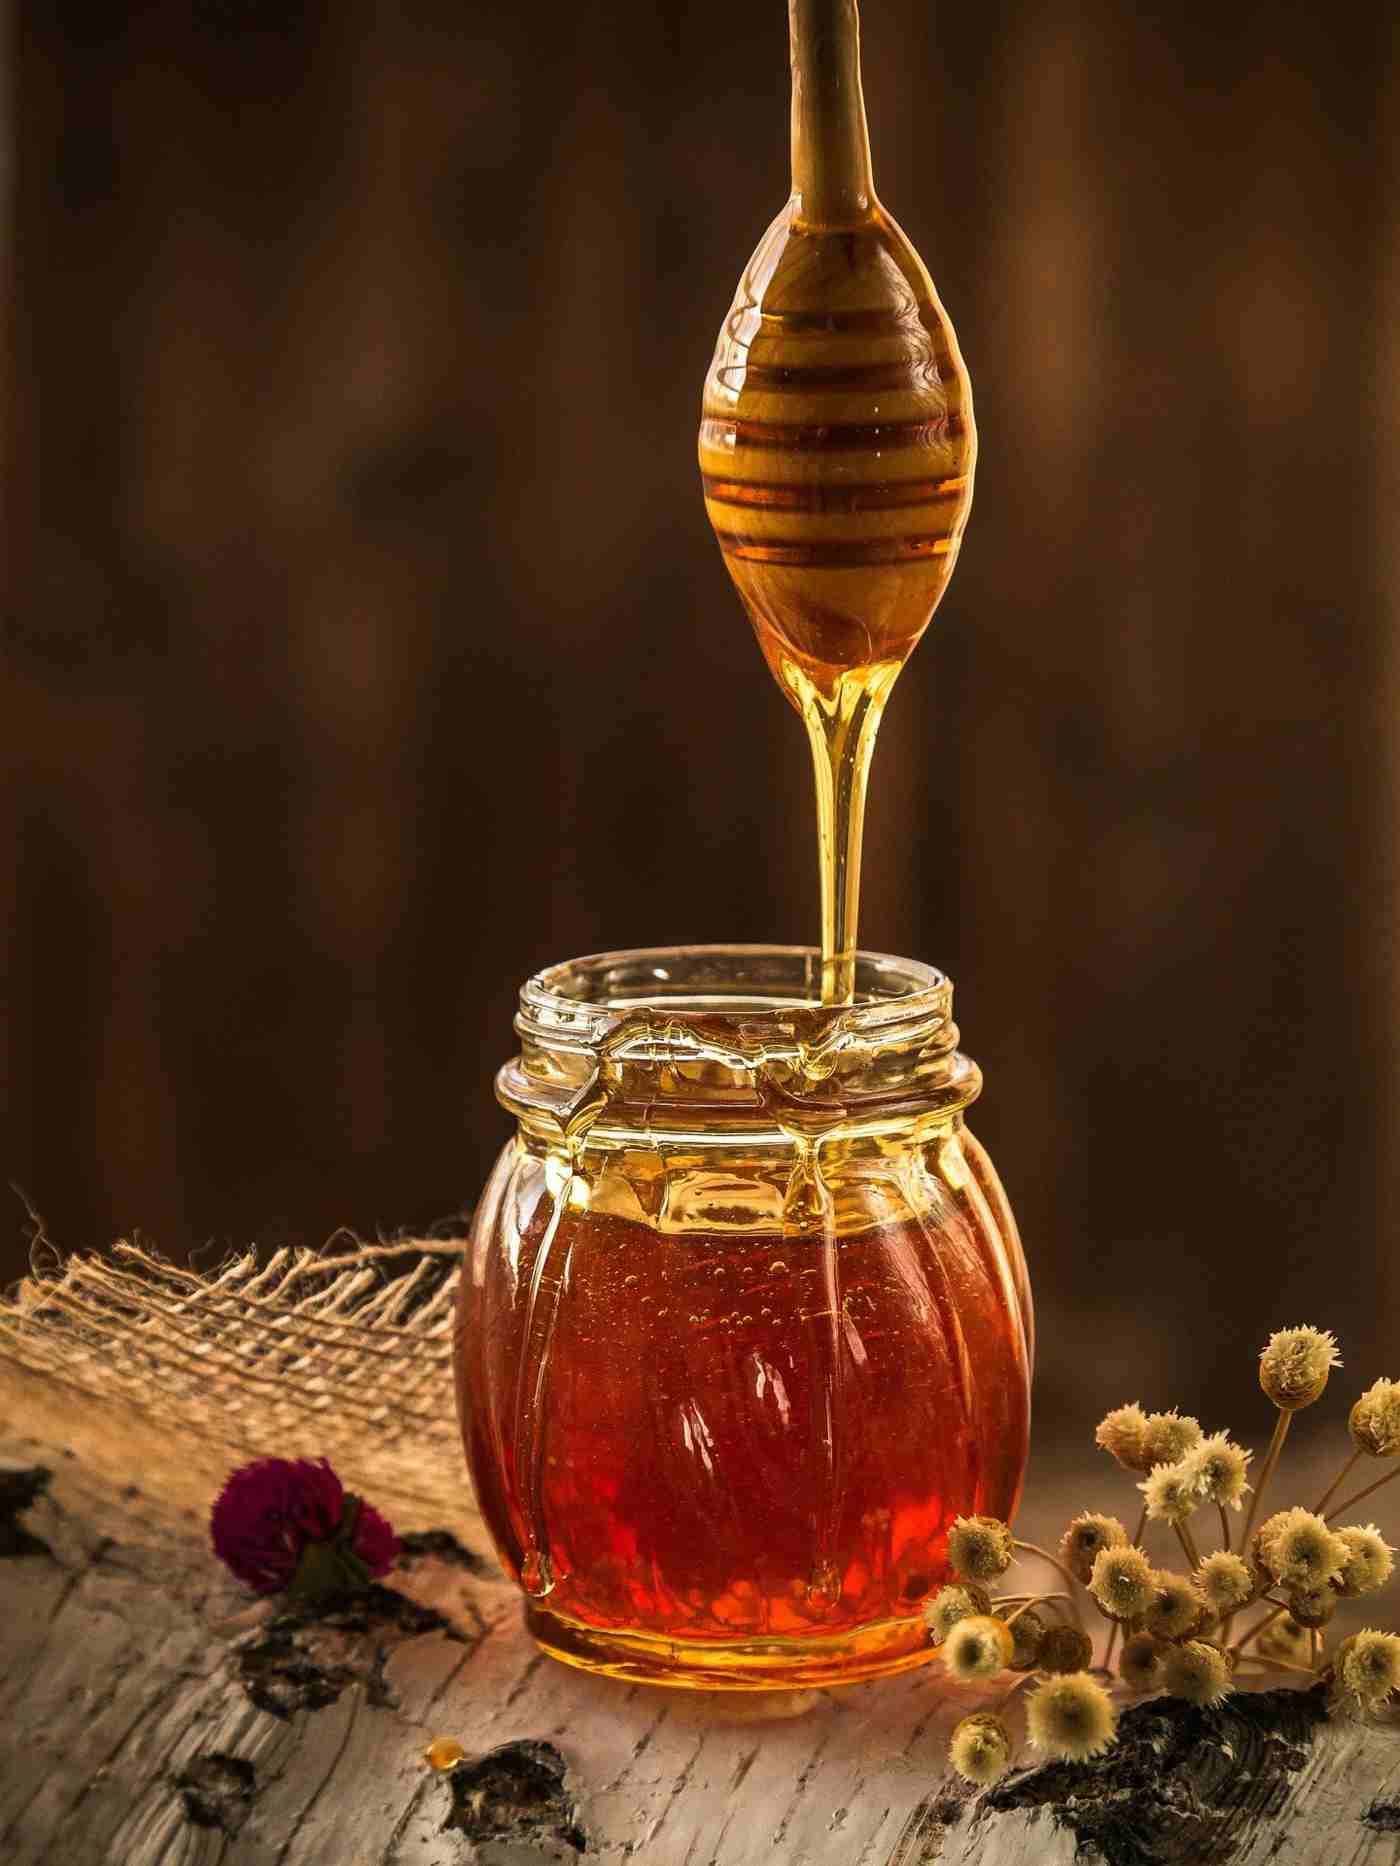 How to use honey in rice coughs - Tips and recipes for imitation